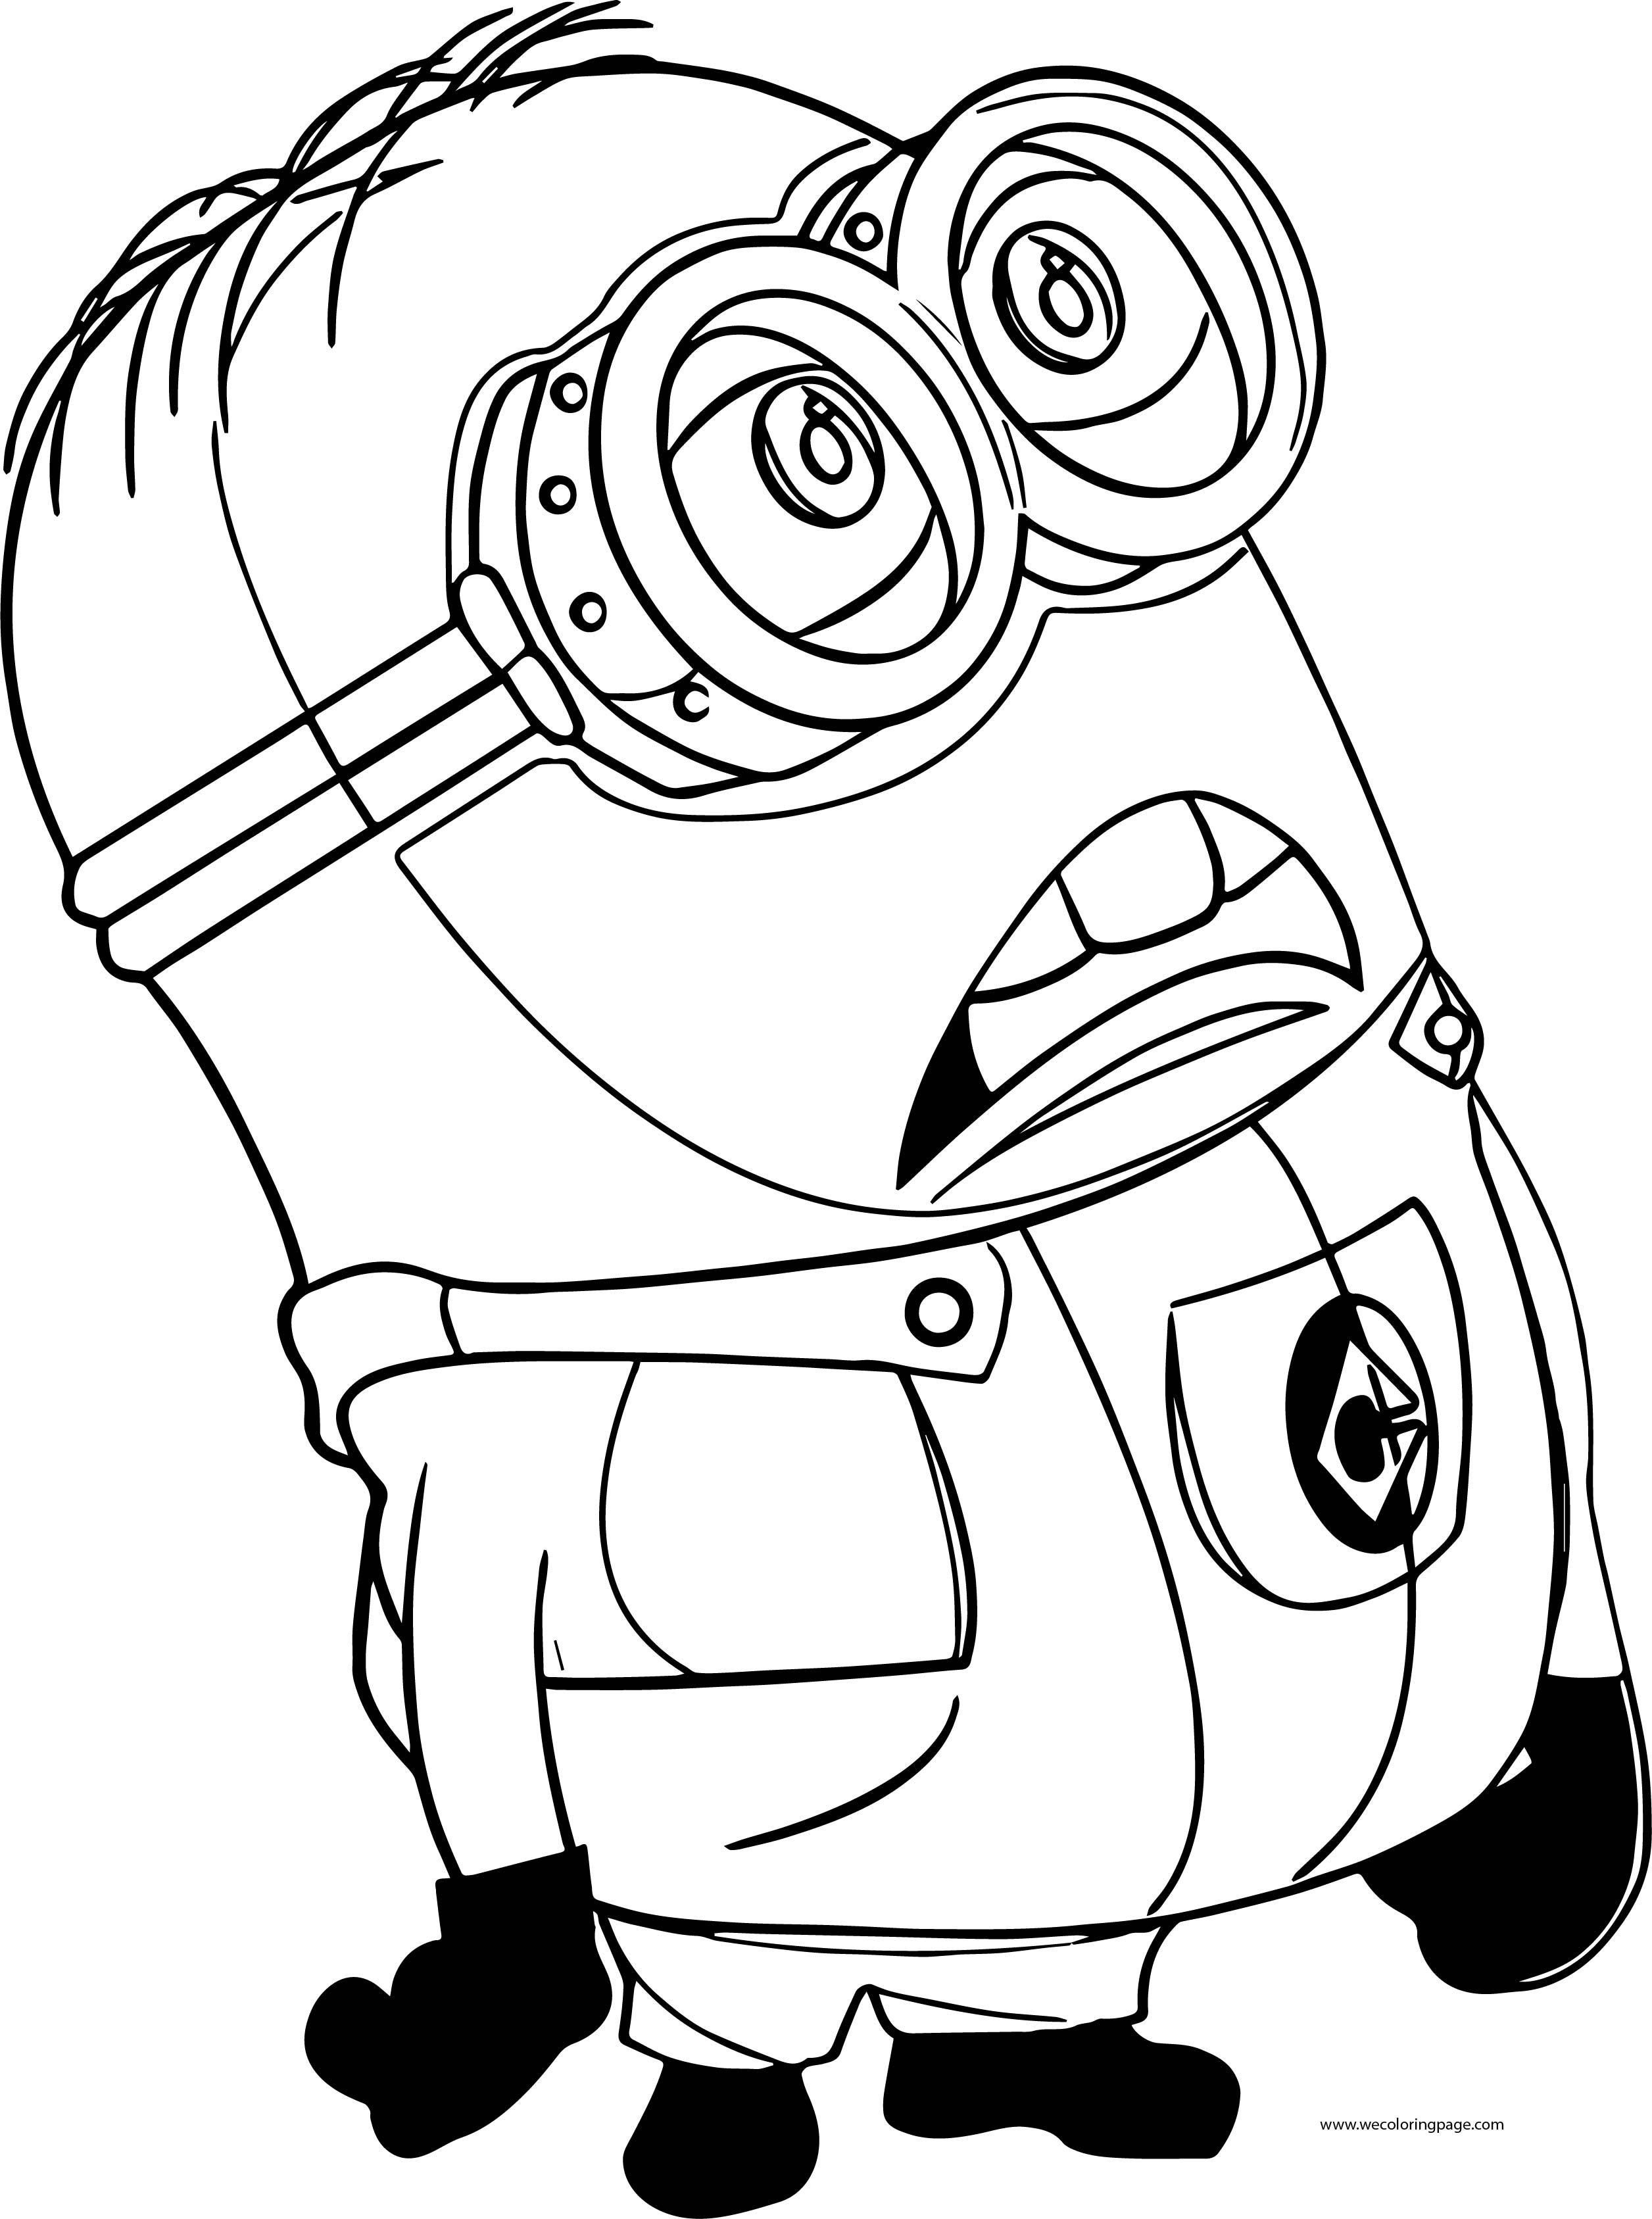 minion-what-coloring-page-wecoloringpage